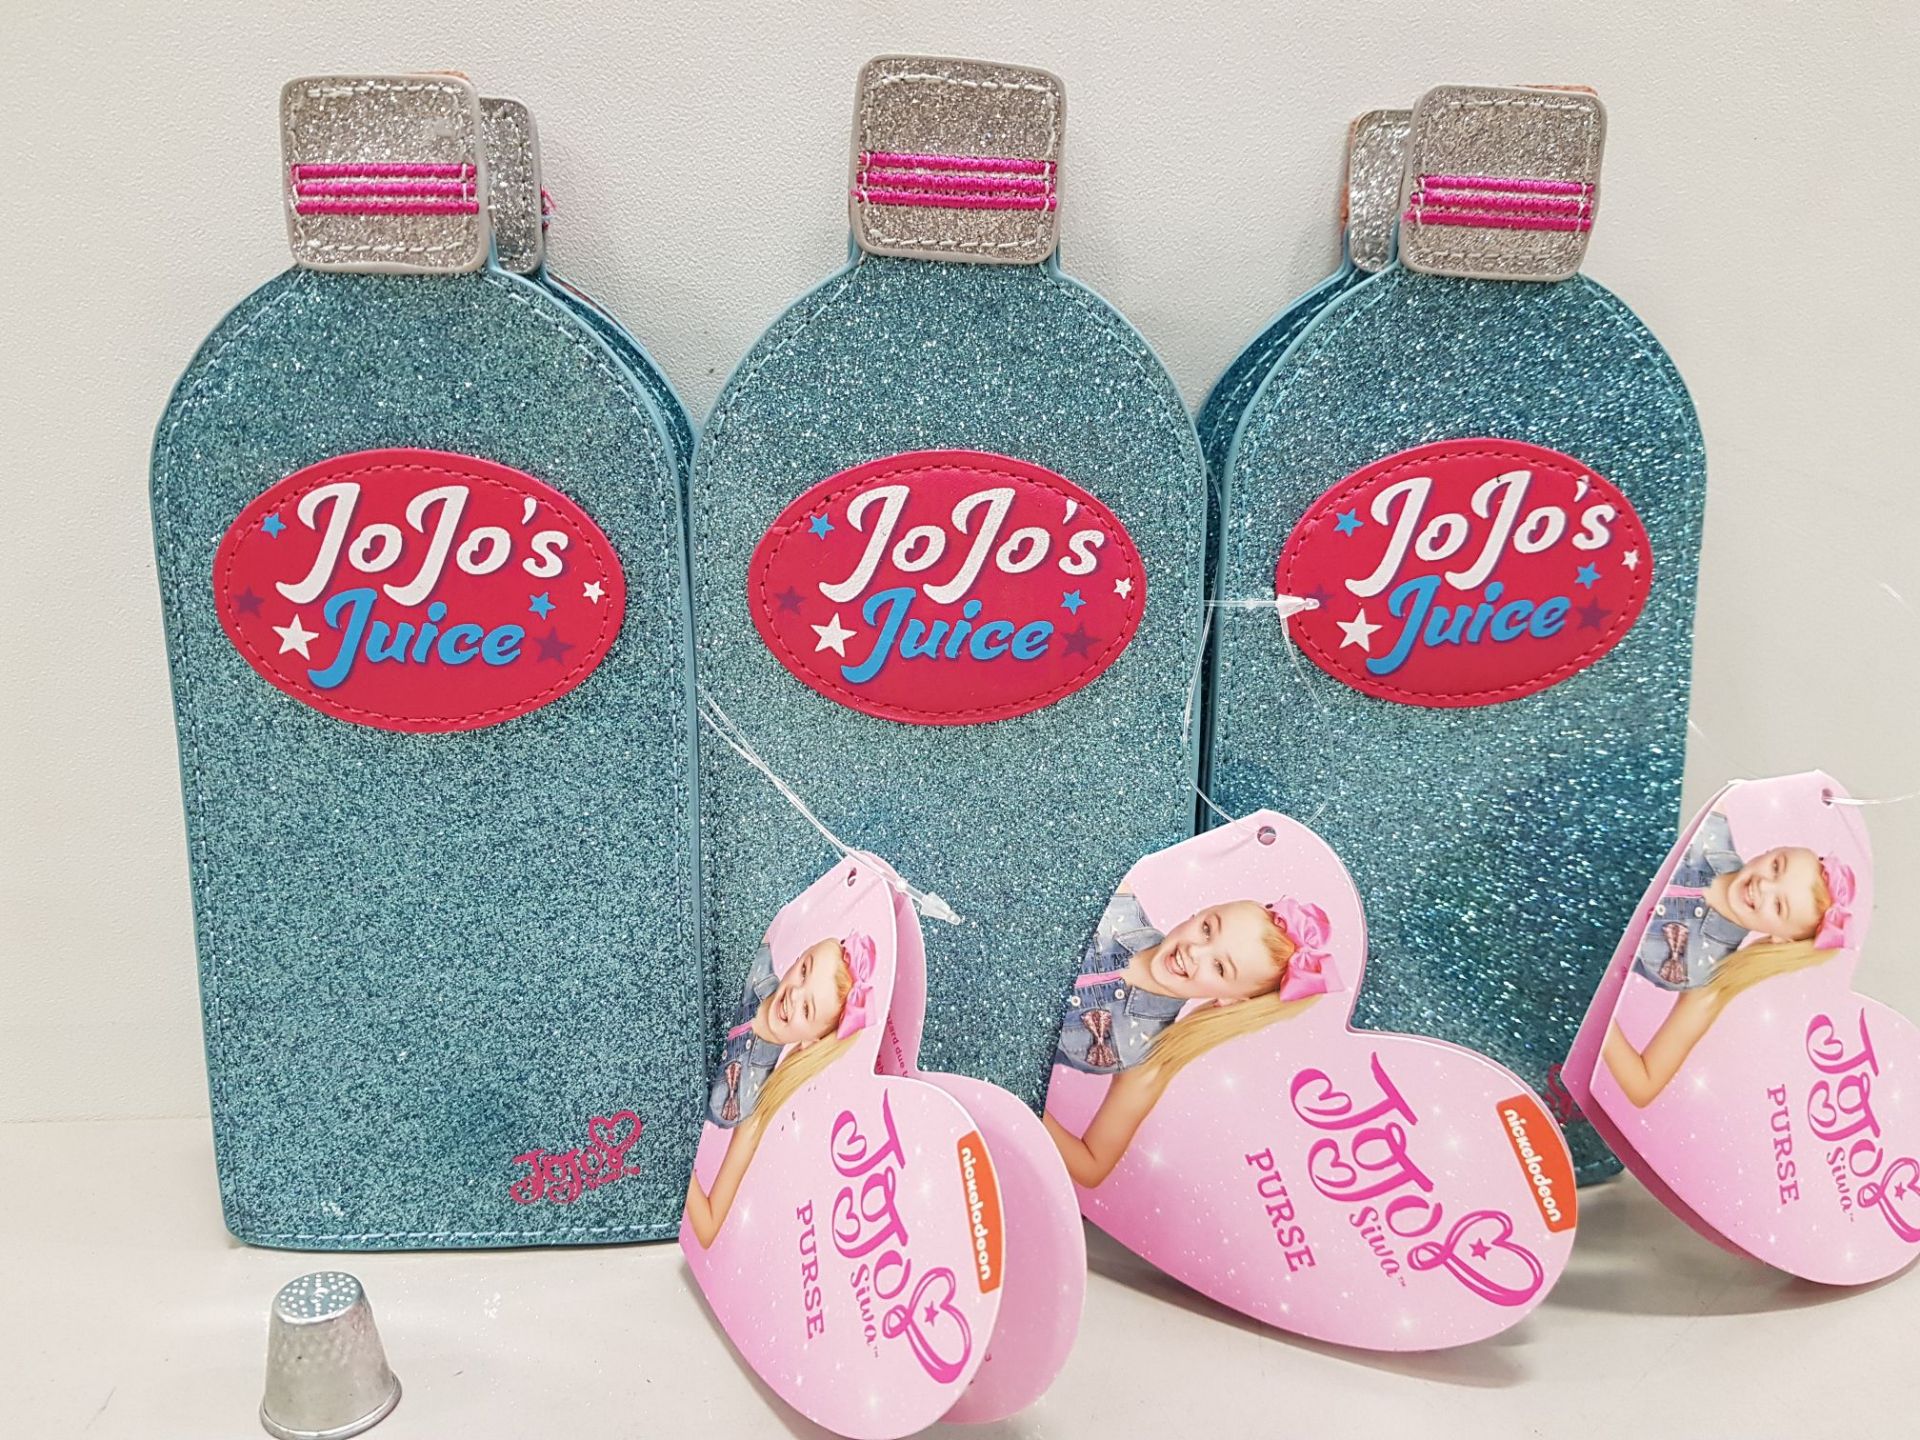 216 X BRAND NEW JOJO SIWA FLAT ZIP PURSE CONTAINED IN 3 BOXES